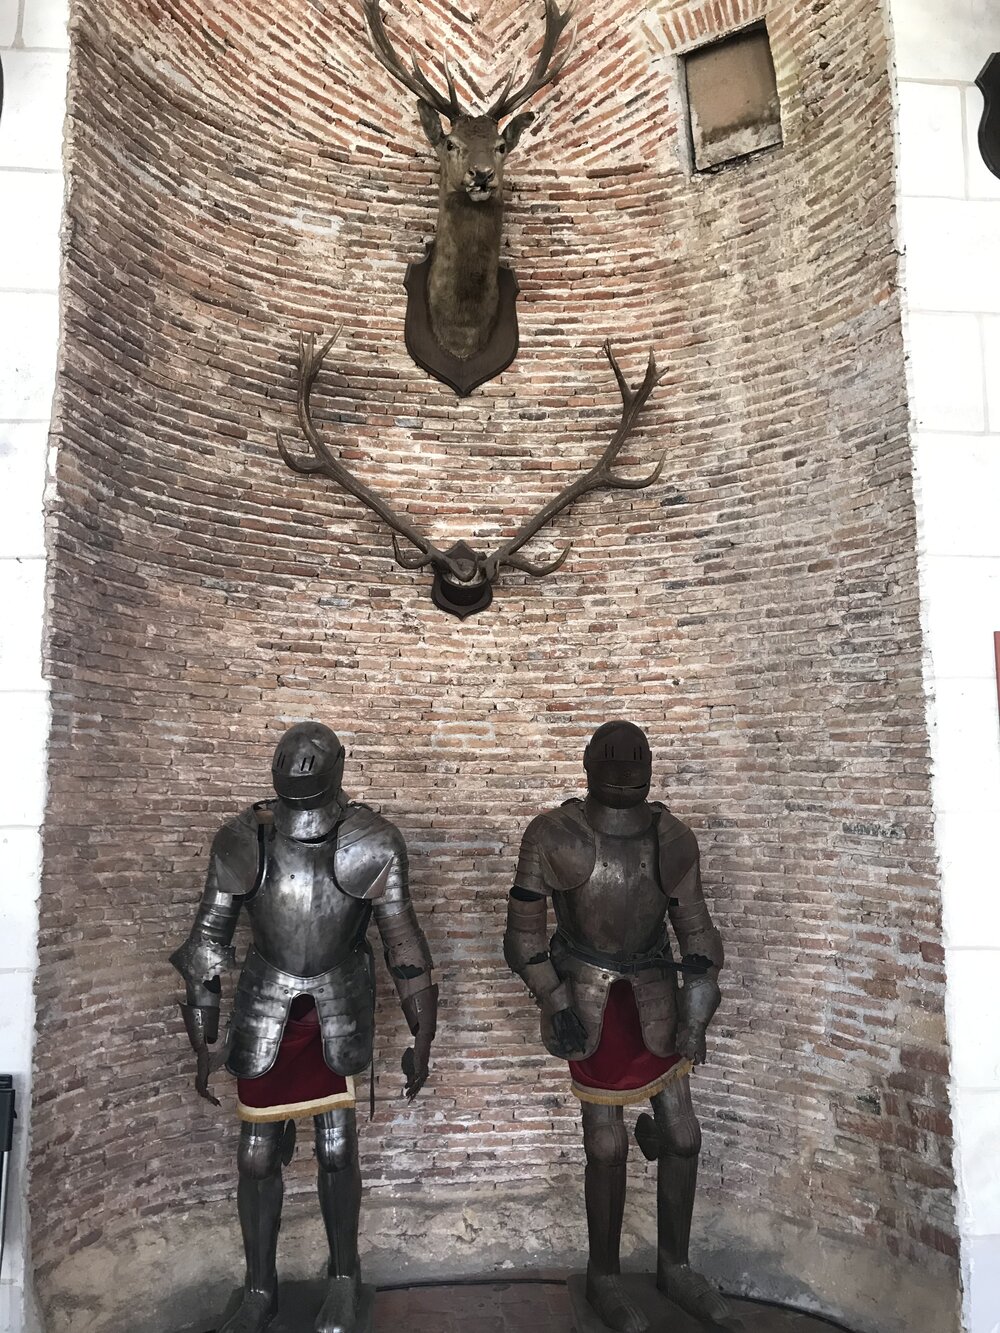 Displays of armor in the great room